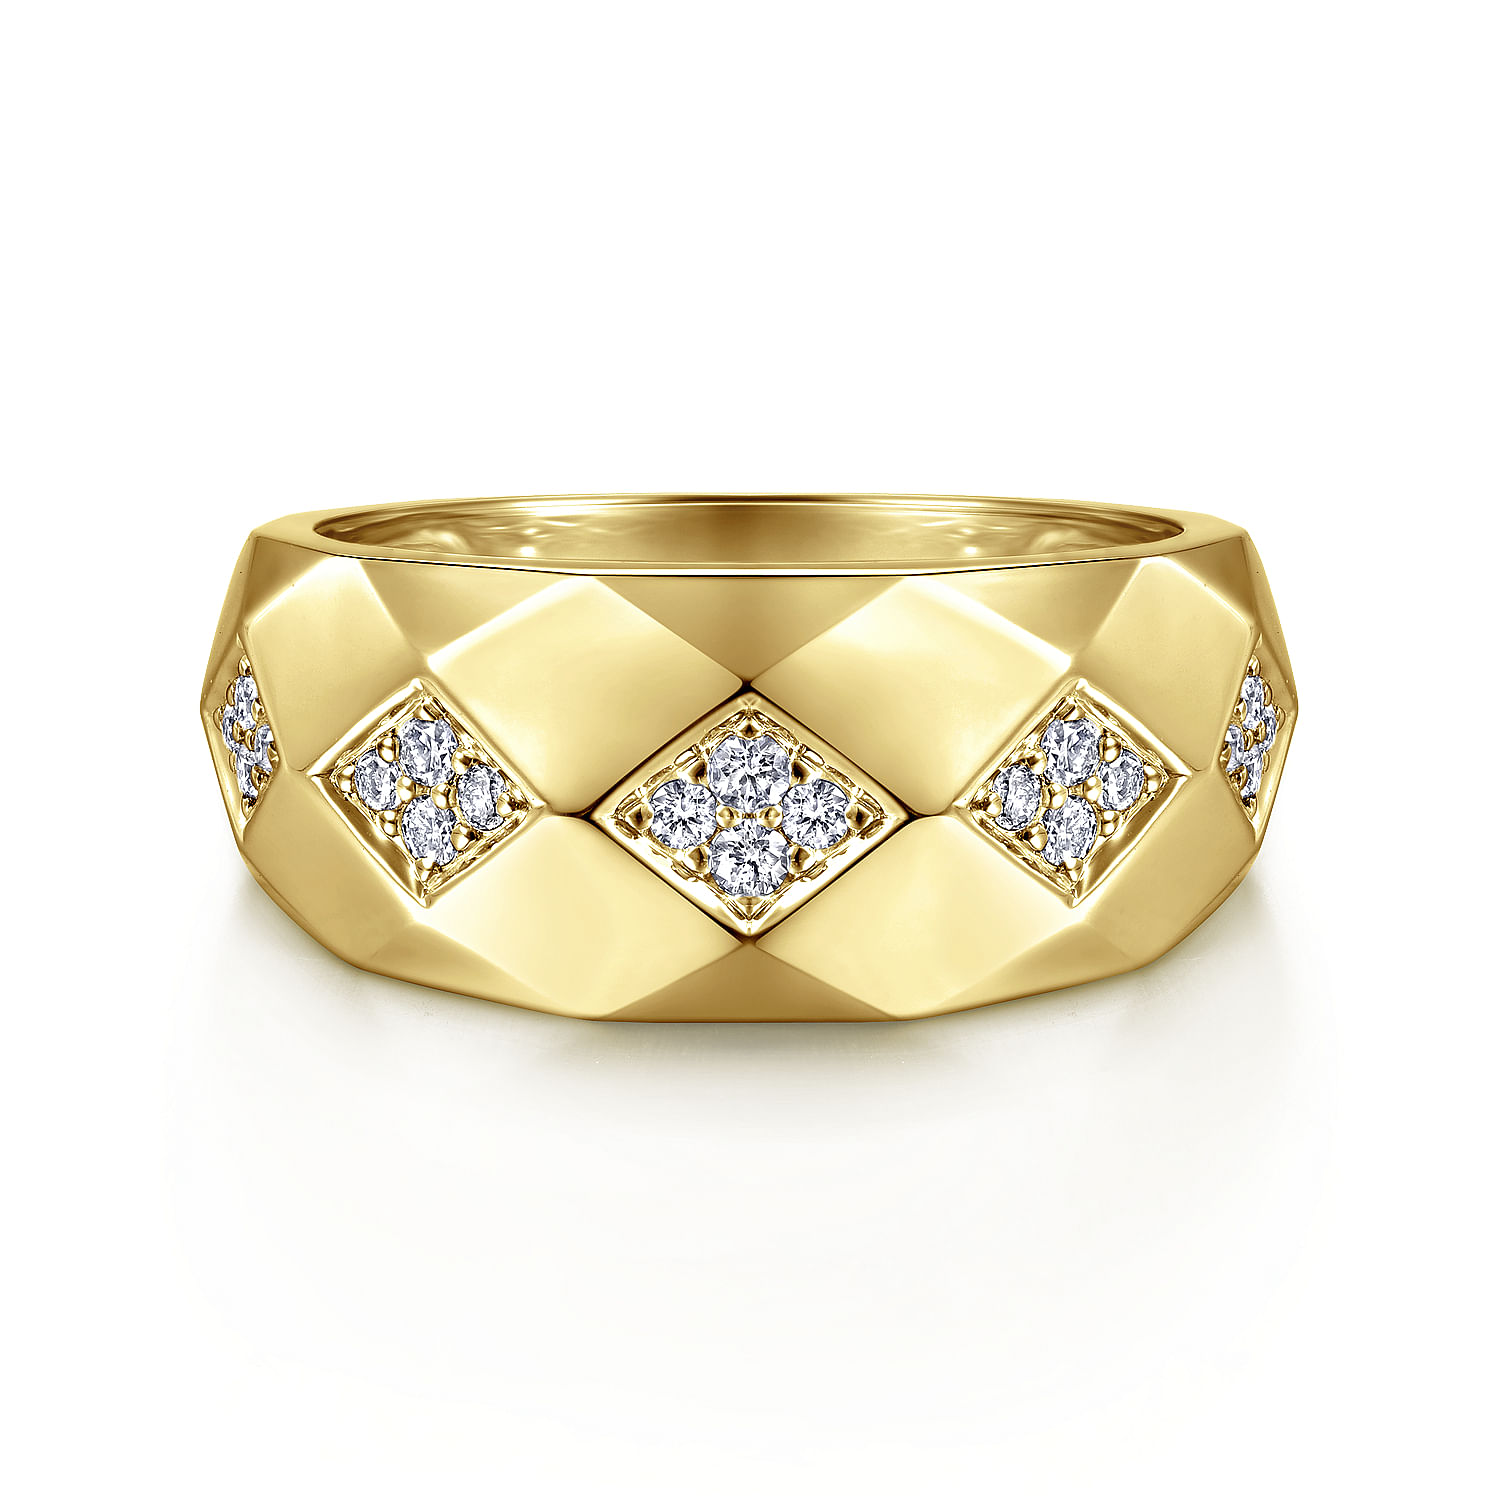 14K Yellow Gold Faceted Diamond Ring in High Polished Finish